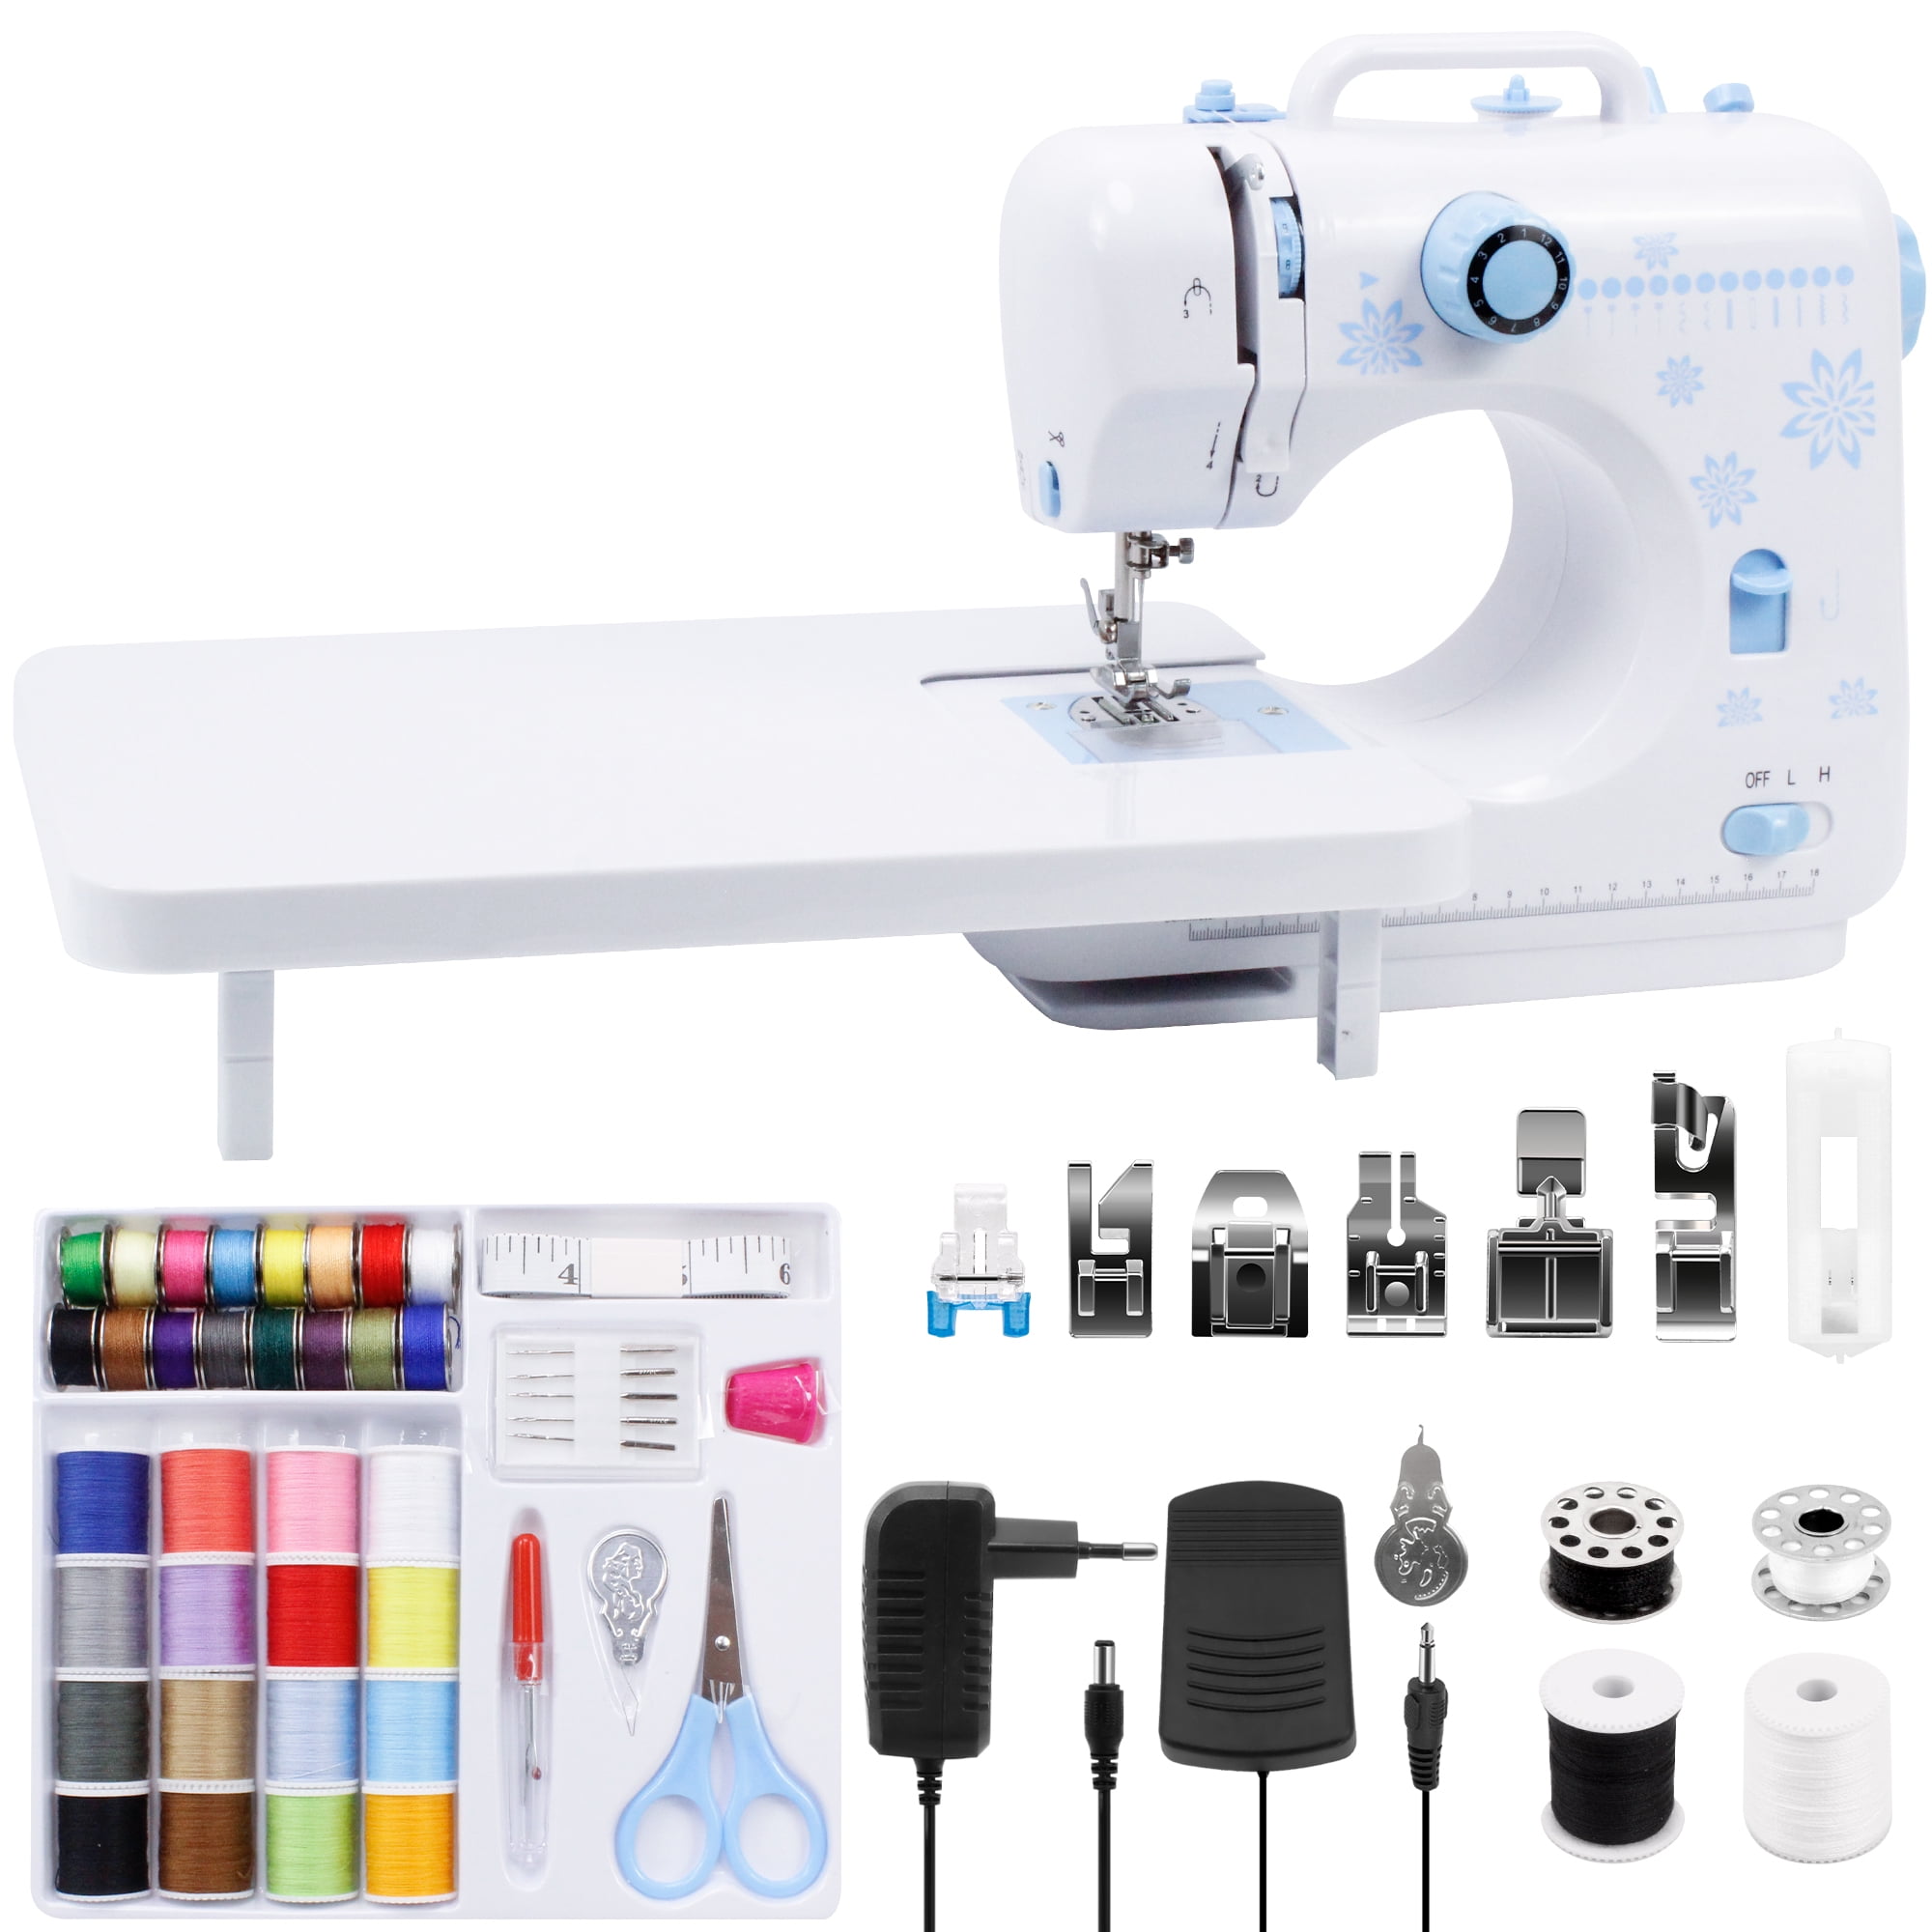 Beginner Sewing Private Lesson Pack - Learn How to Sew and Use a Sewing  Machine — Fair Fit Studio